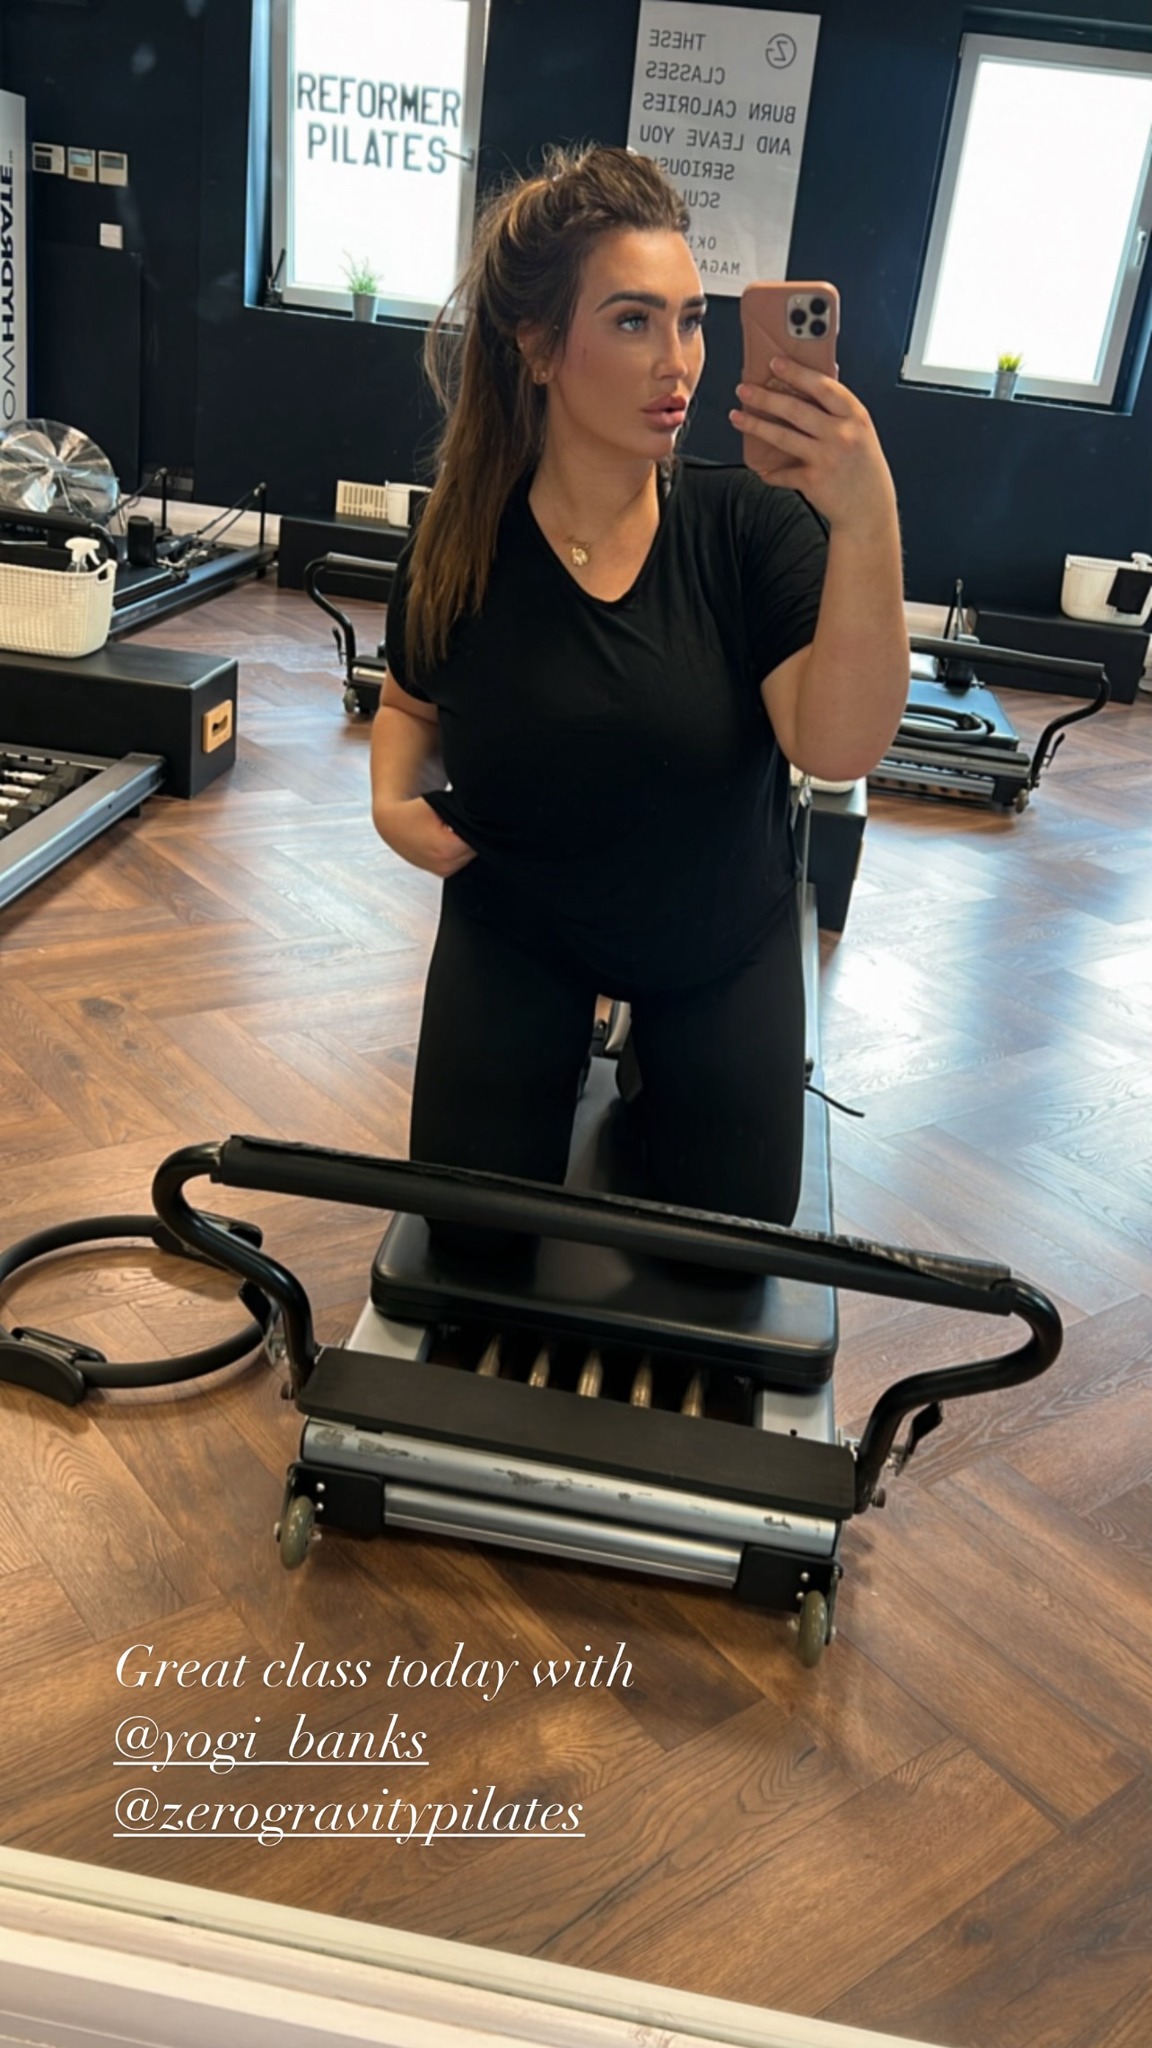 Lauren Goodger hits back at body-shamers with empowering gym selfie